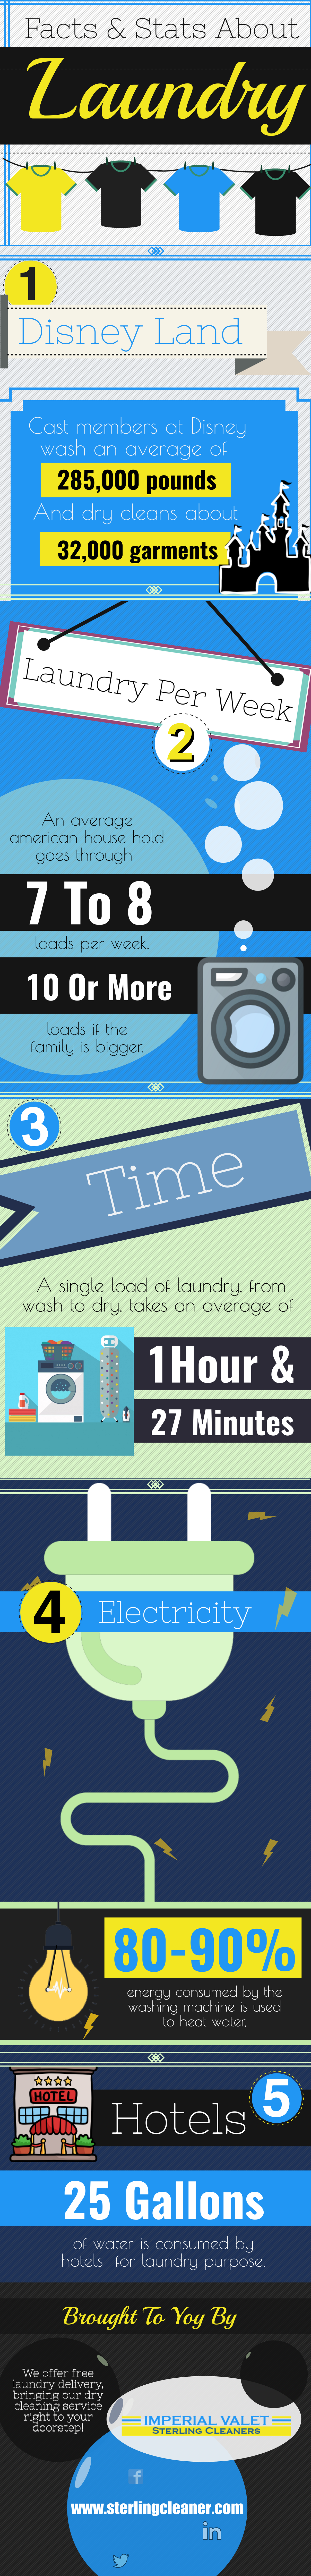 Facts And Stats About Laundry